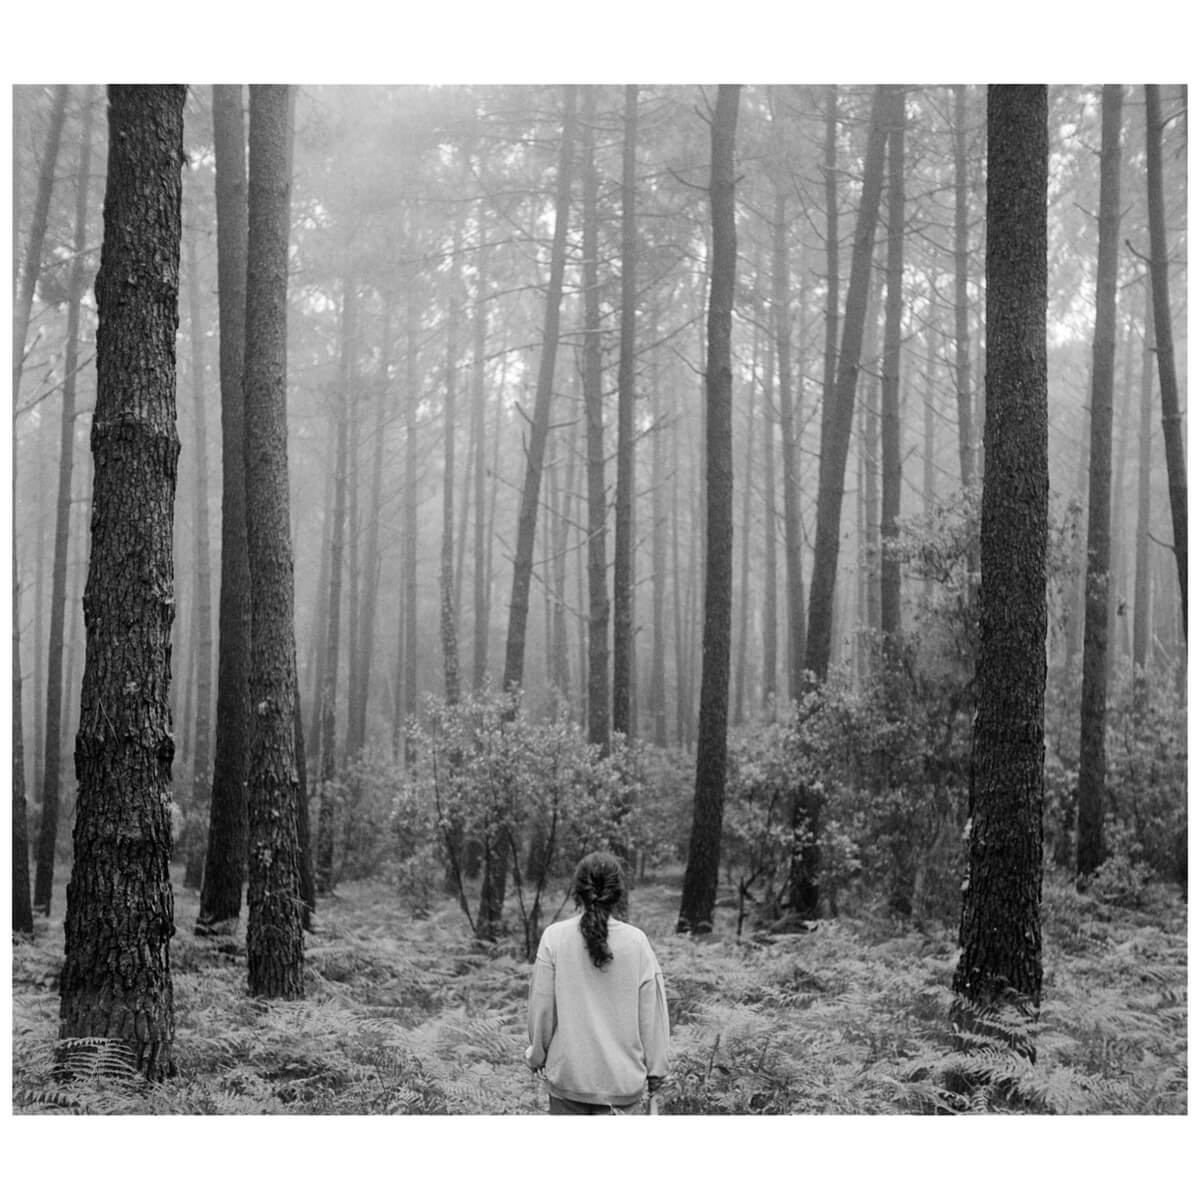 5 Frames... Of a foggy forest on an English TLR and Kodak Tri-X 400 (120 Format / EI 400 / MPP Microcord MKII + 77.5mm f/3.5 Ross Xpres) - by Leo Nikishin